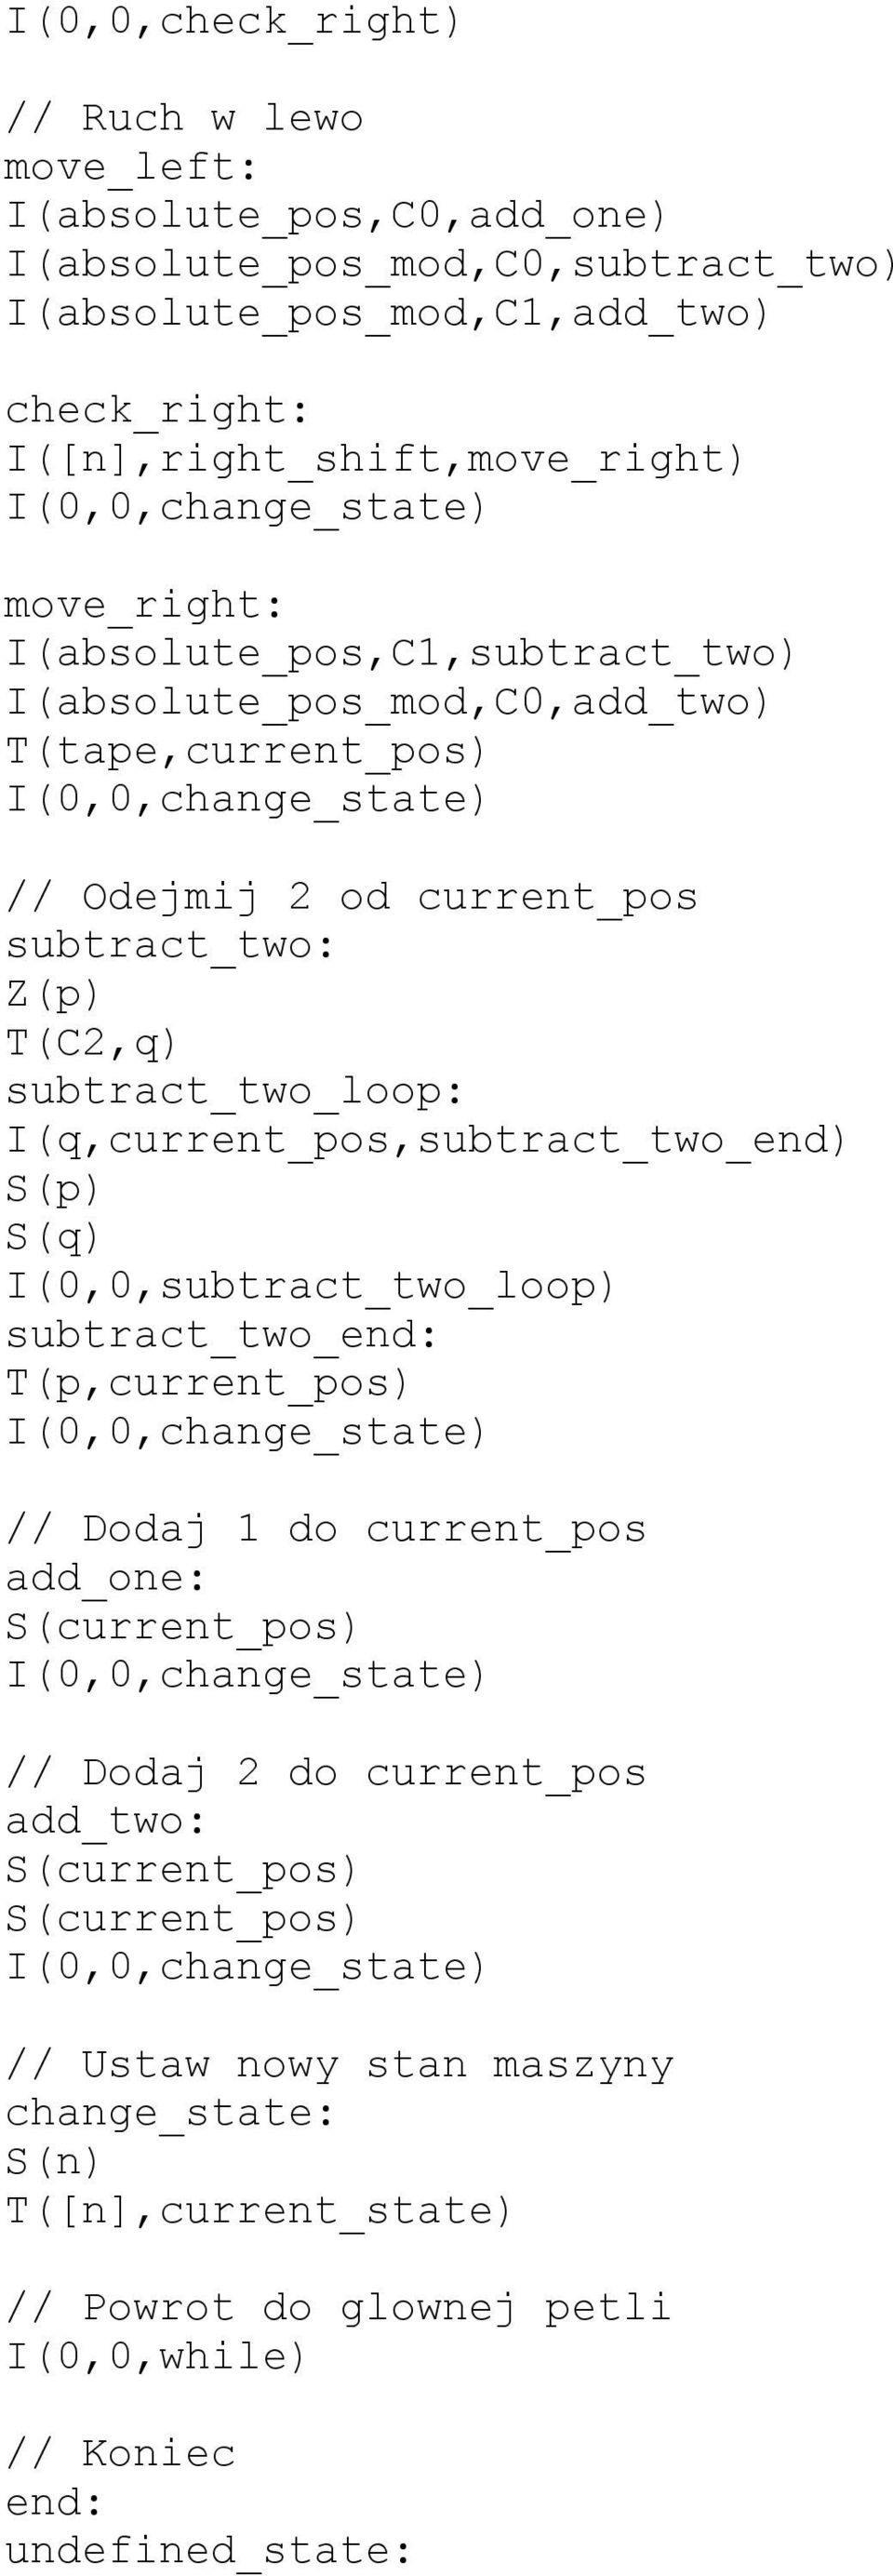 subtract_two_loop: I(q,current_pos,subtract_two_end) S(p) S(q) I(0,0,subtract_two_loop) subtract_two_end: T(p,current_pos) I(0,0,change_state) // Dodaj 1 do current_pos add_one: